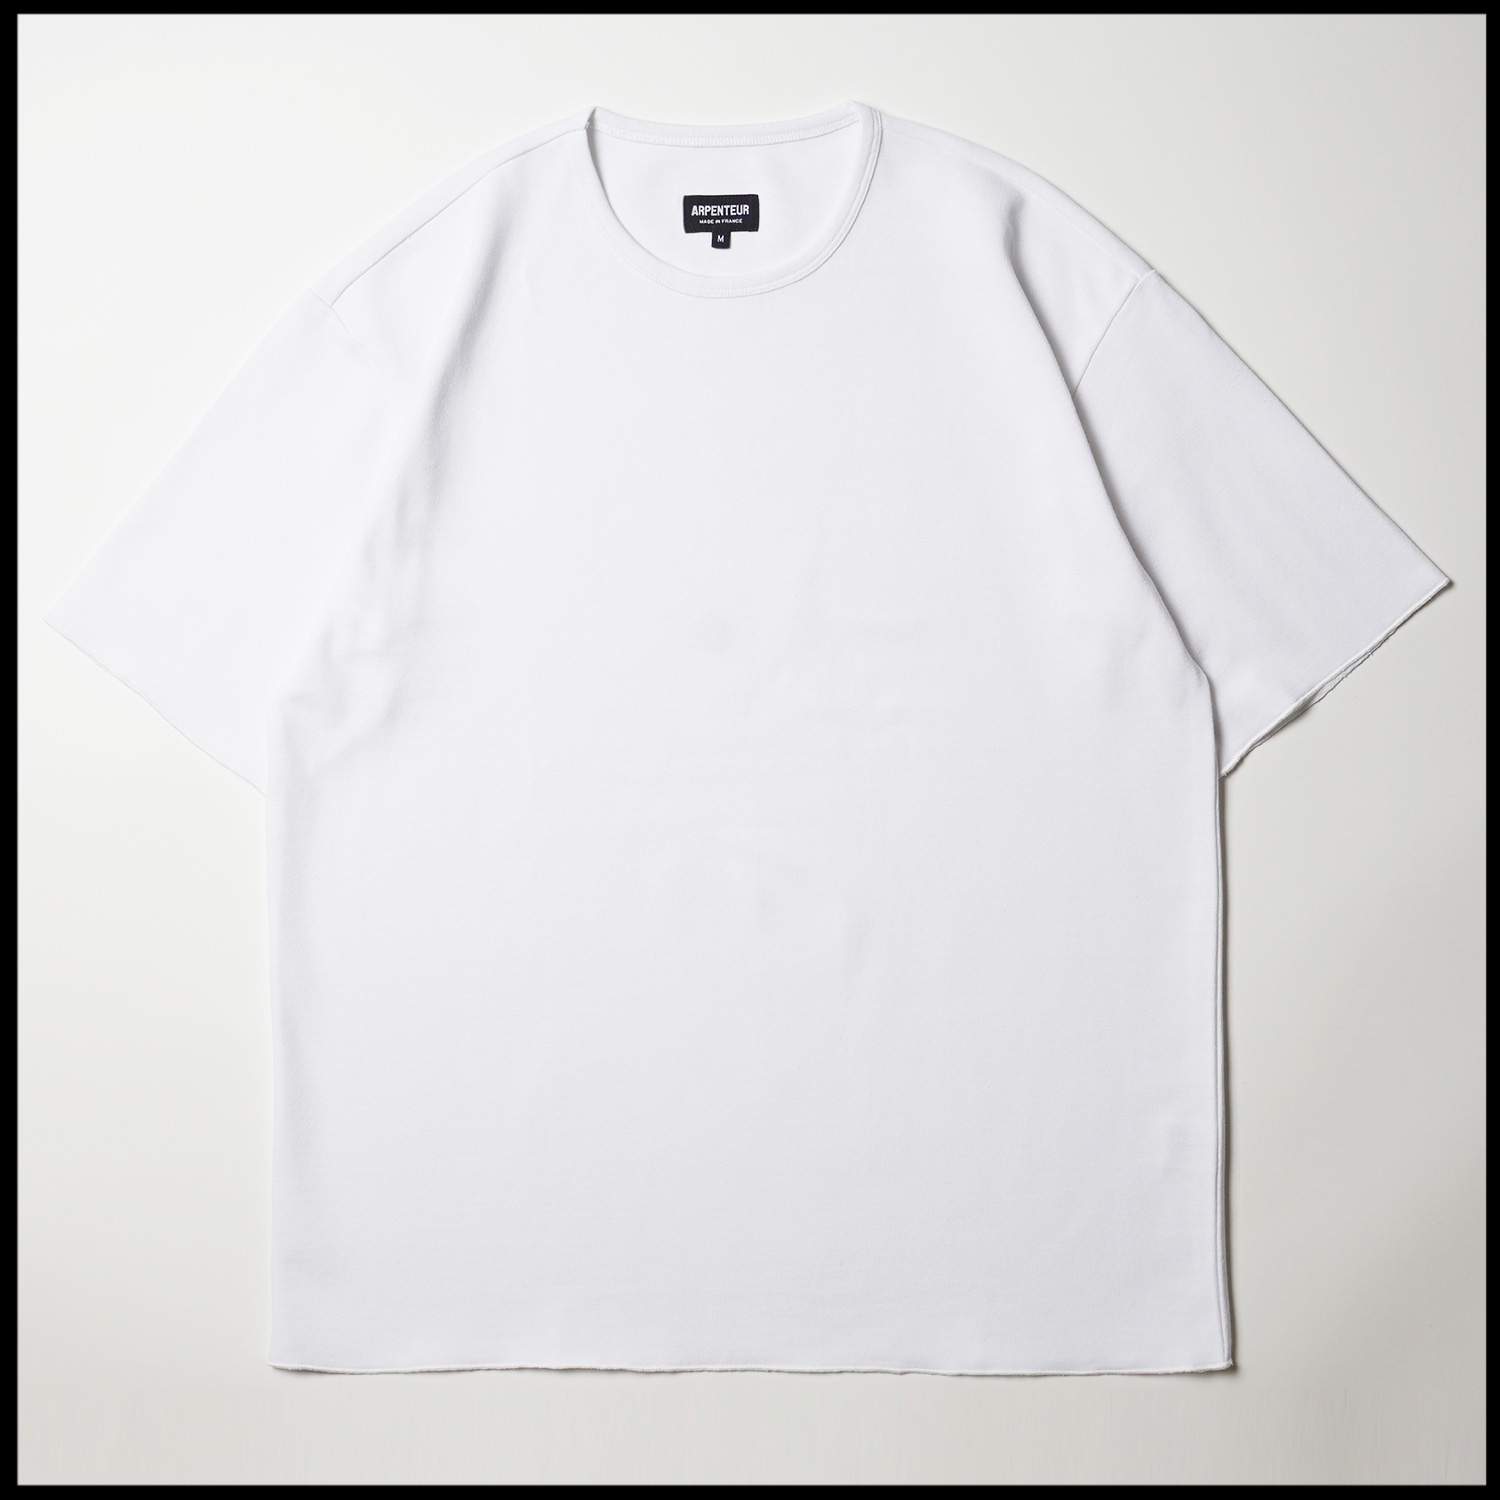 Pontus t-shirt in White color by Arpenteur